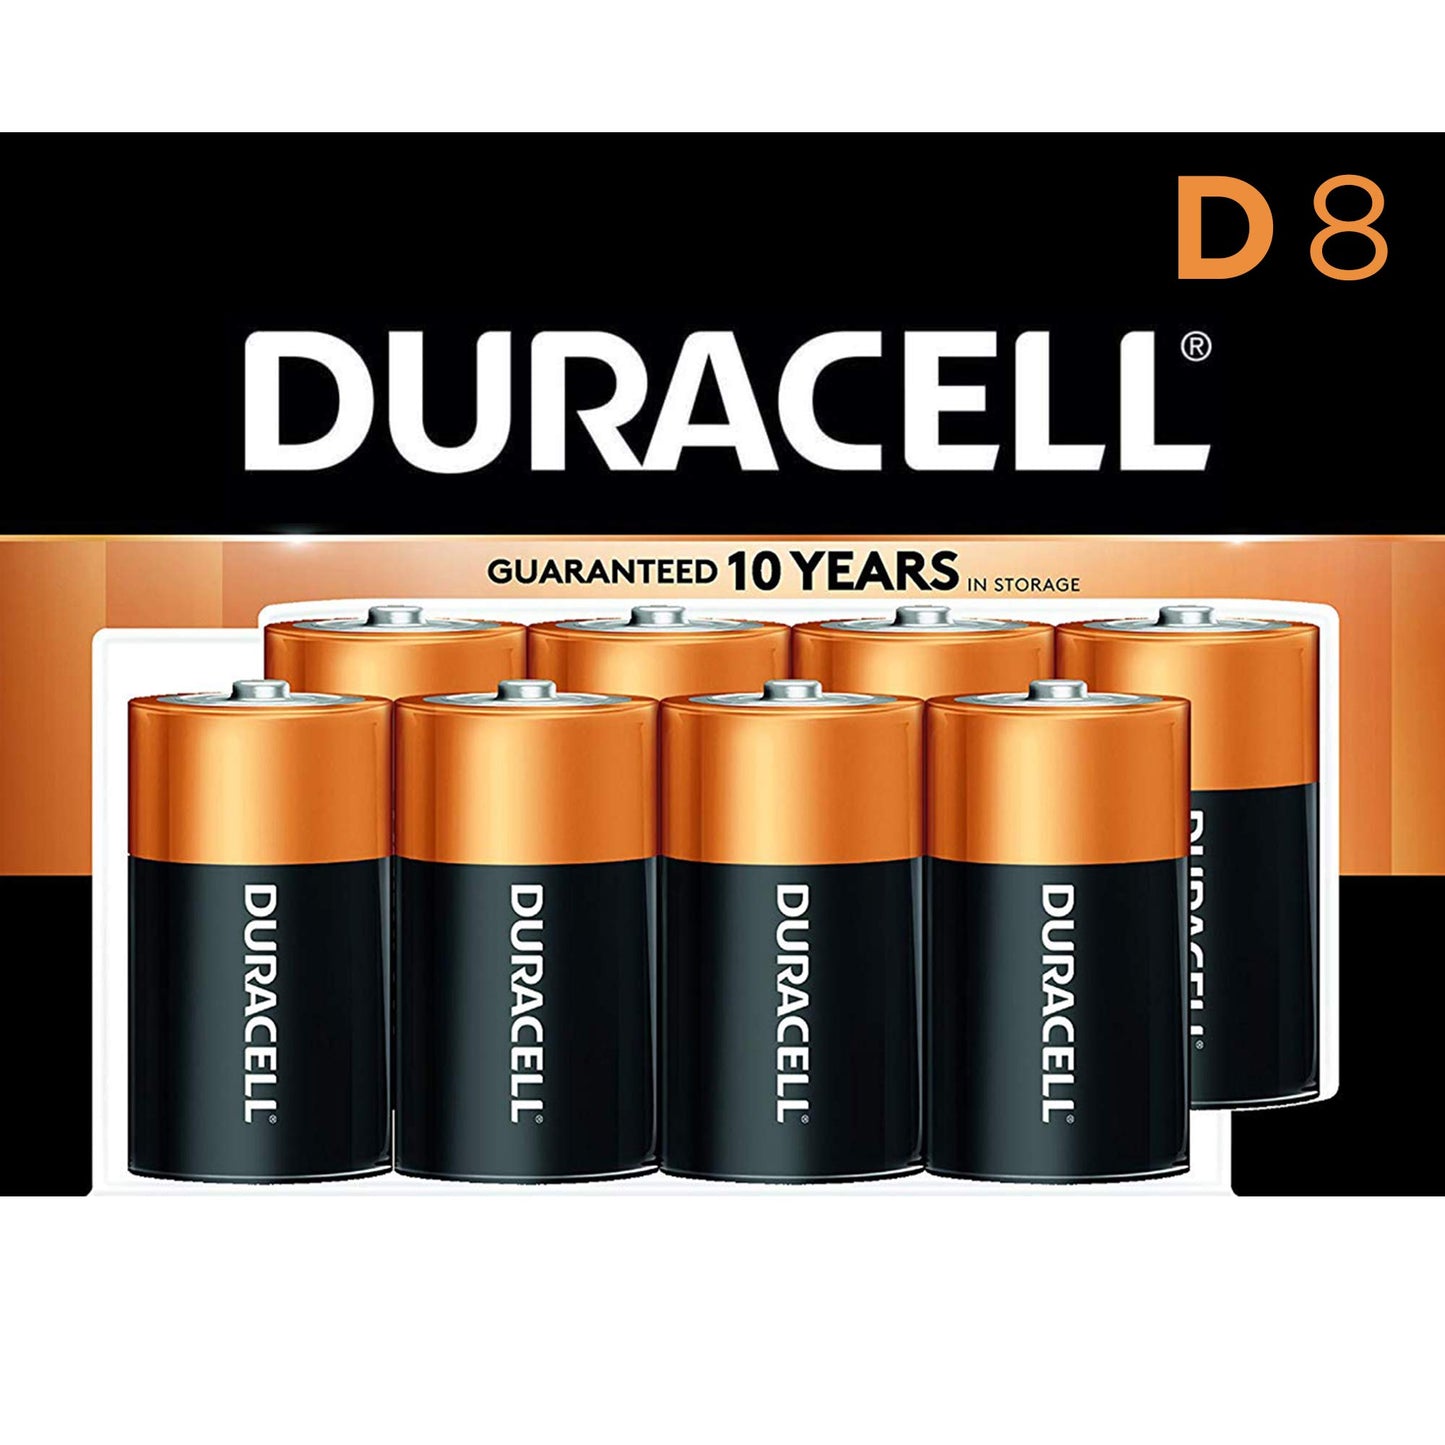 Duracell - CopperTop D Alkaline Batteries with Recloseable Package - Long Lasting, All-Purpose D Battery for Household and Business - 8 Count